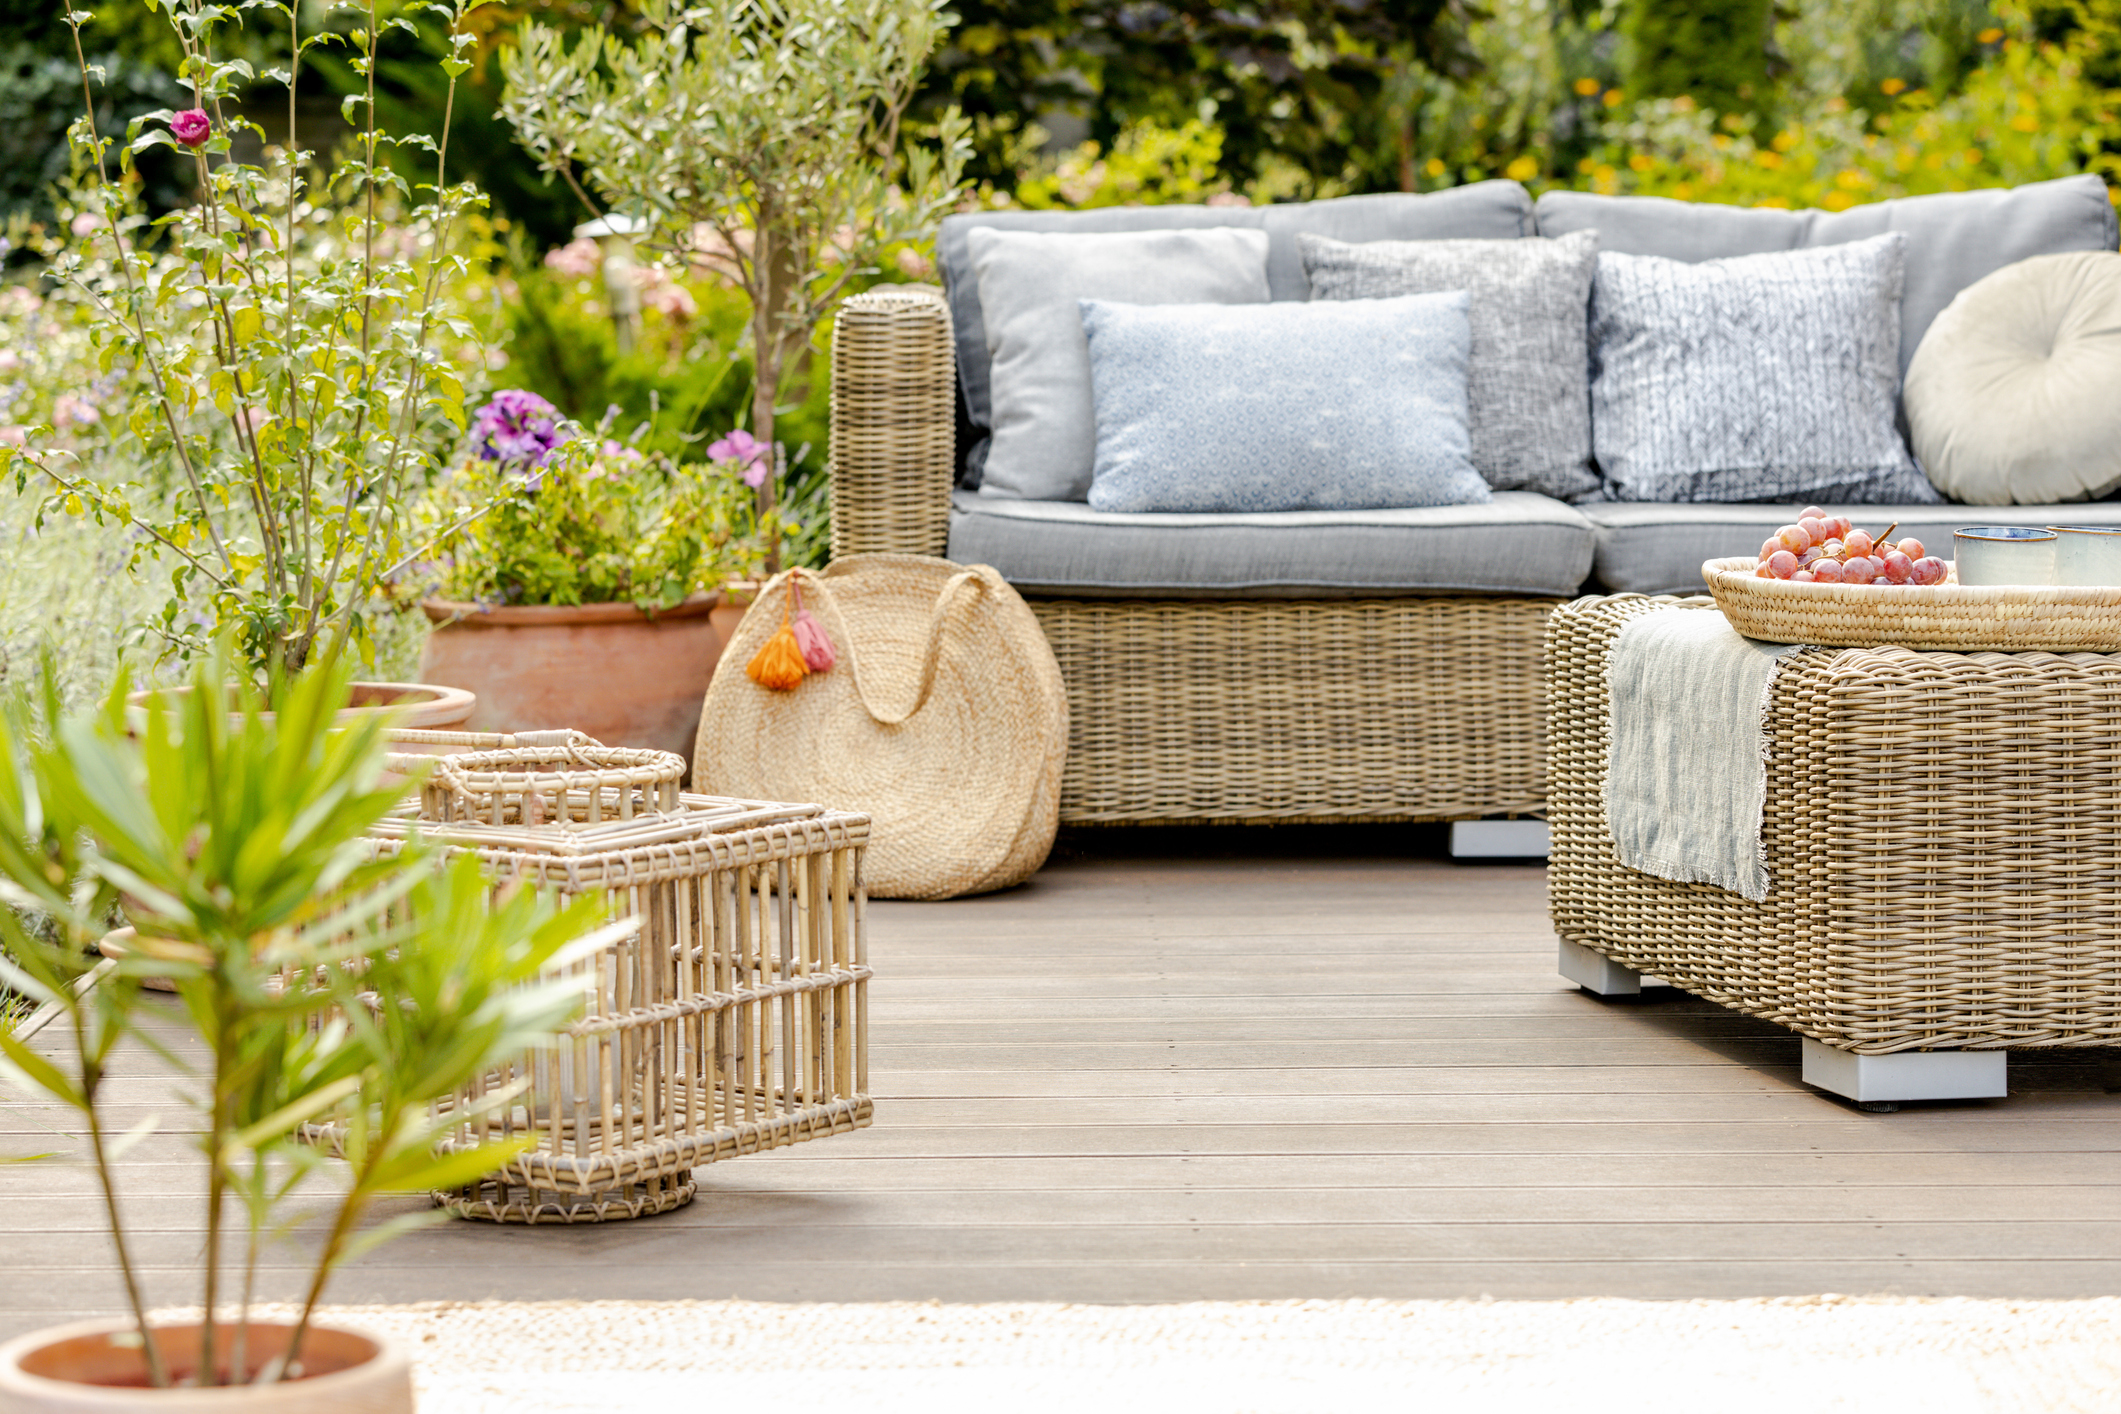 Is it Spring yet? 6 outdoor décor ideas to freshen up your space